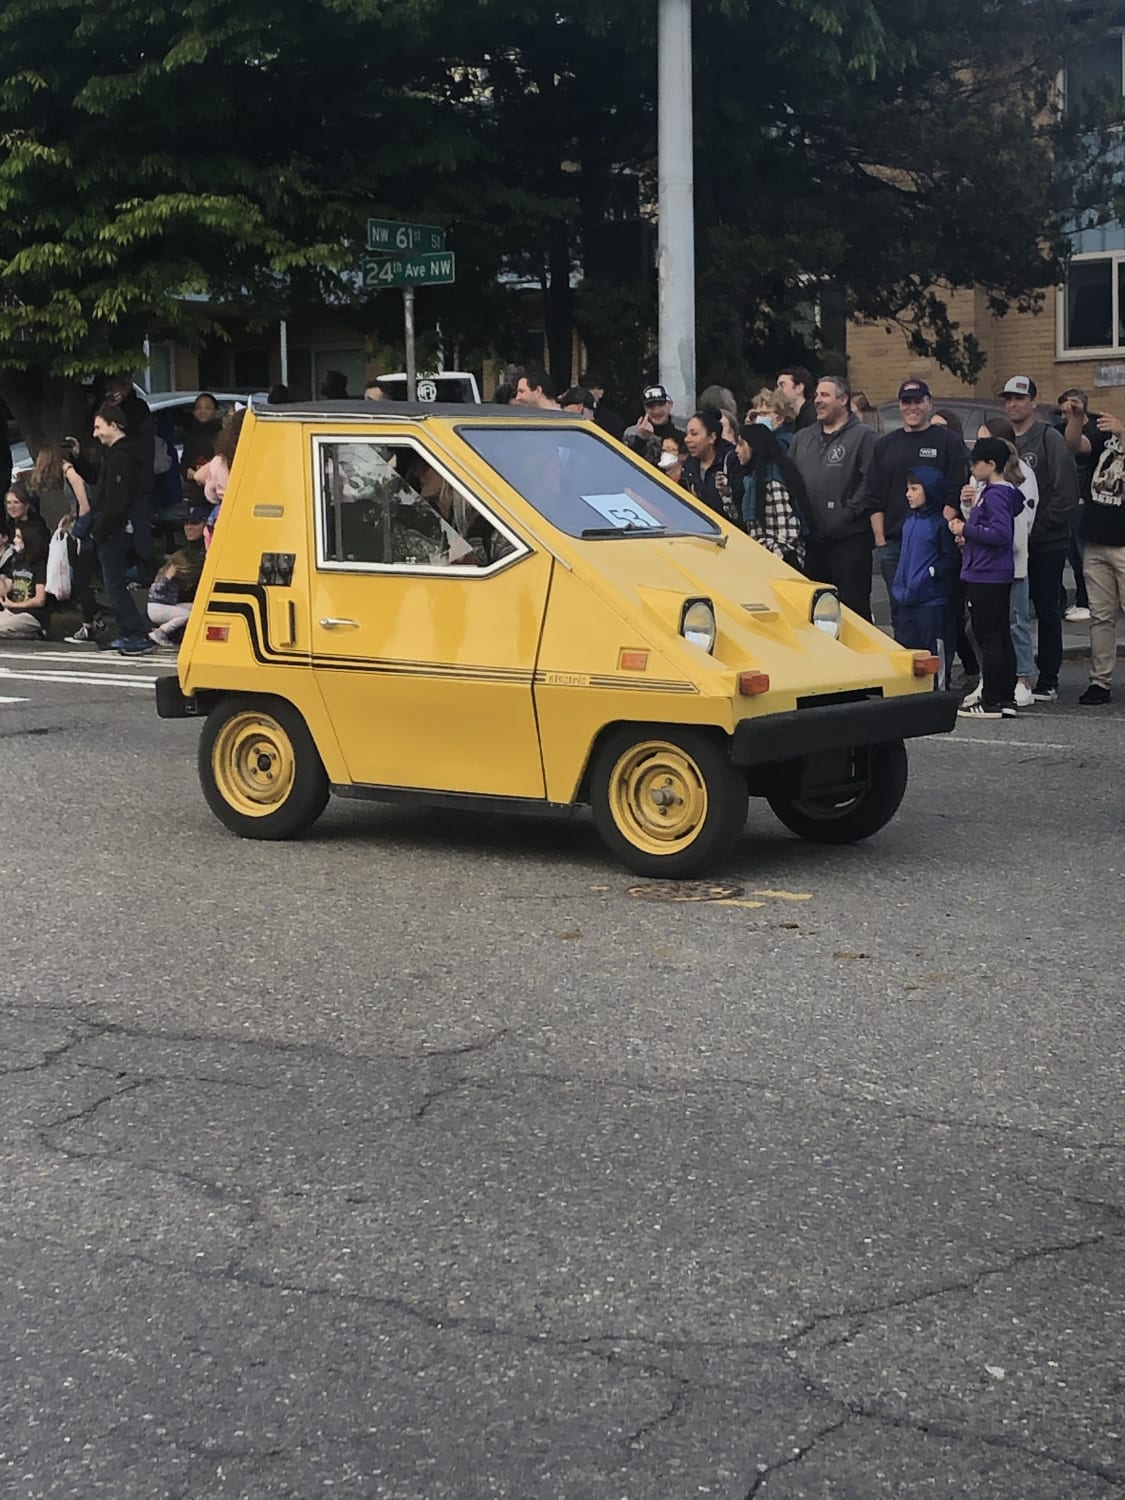 70’s Electric citi car in a parade in Seattle today.